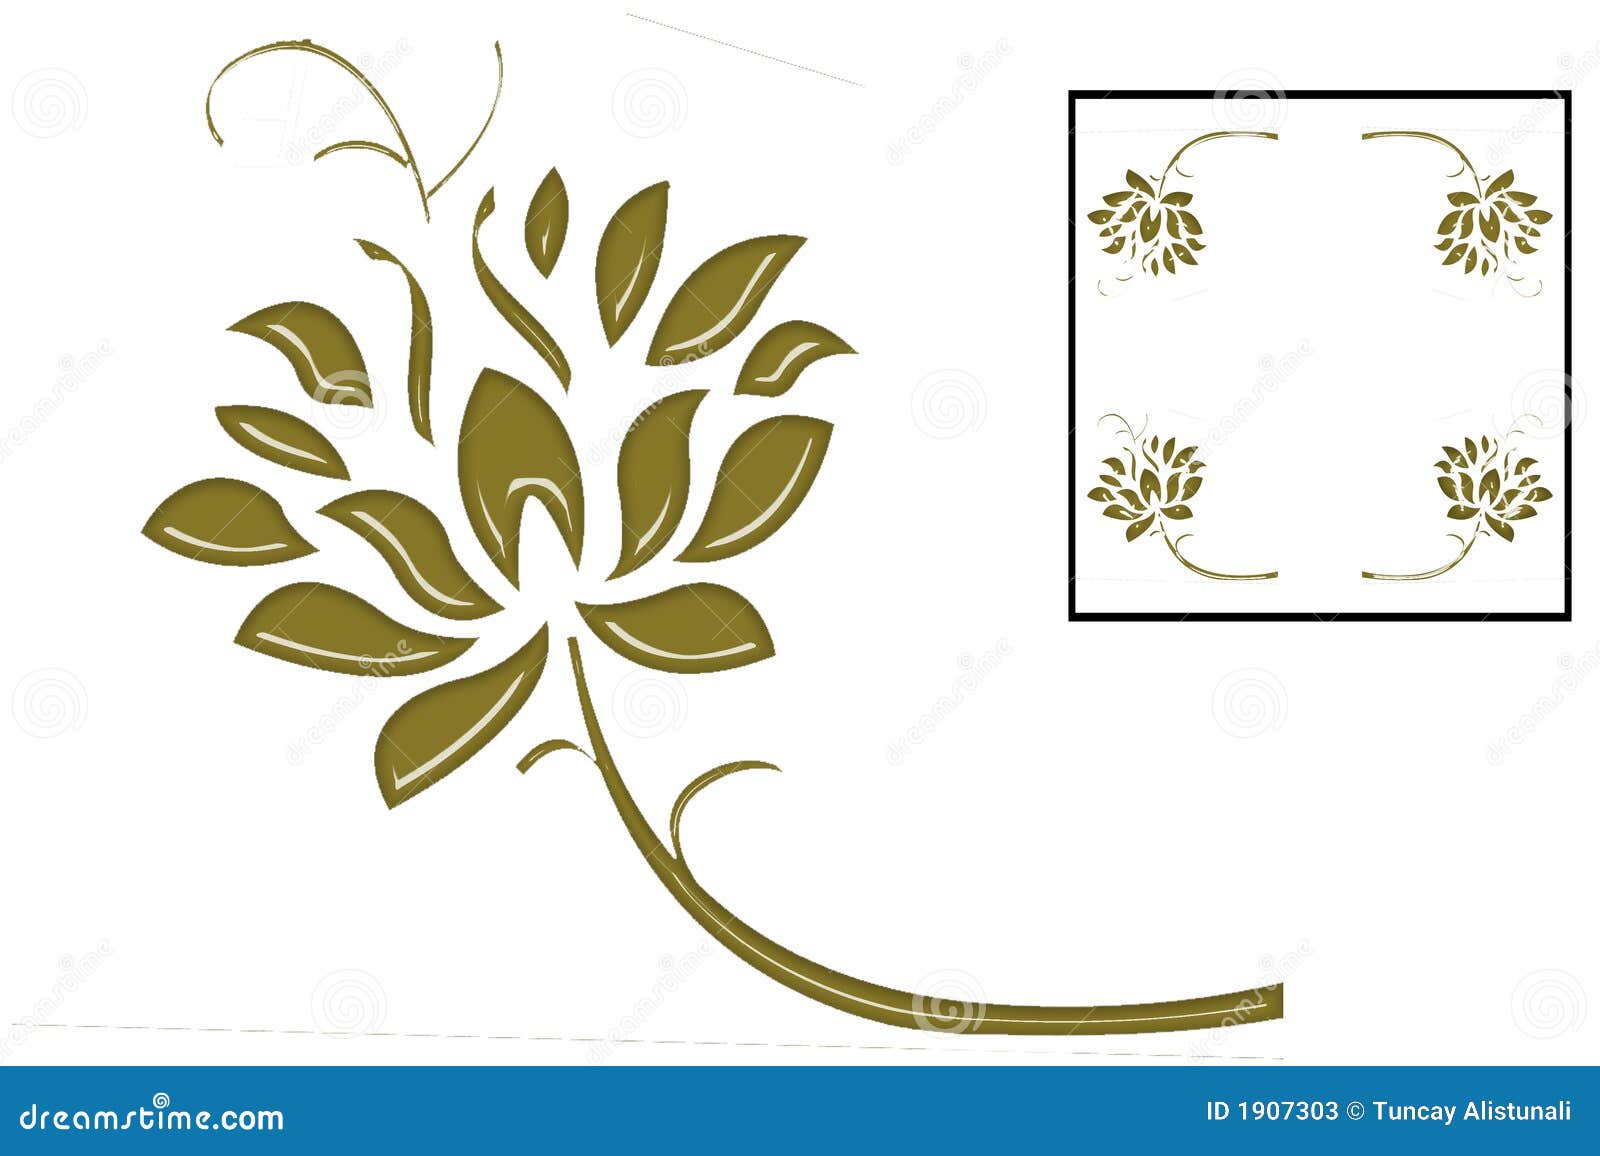 GOLD IVY IS FRAME, DESIGN LOVE Stock Photos  Image: 1907303